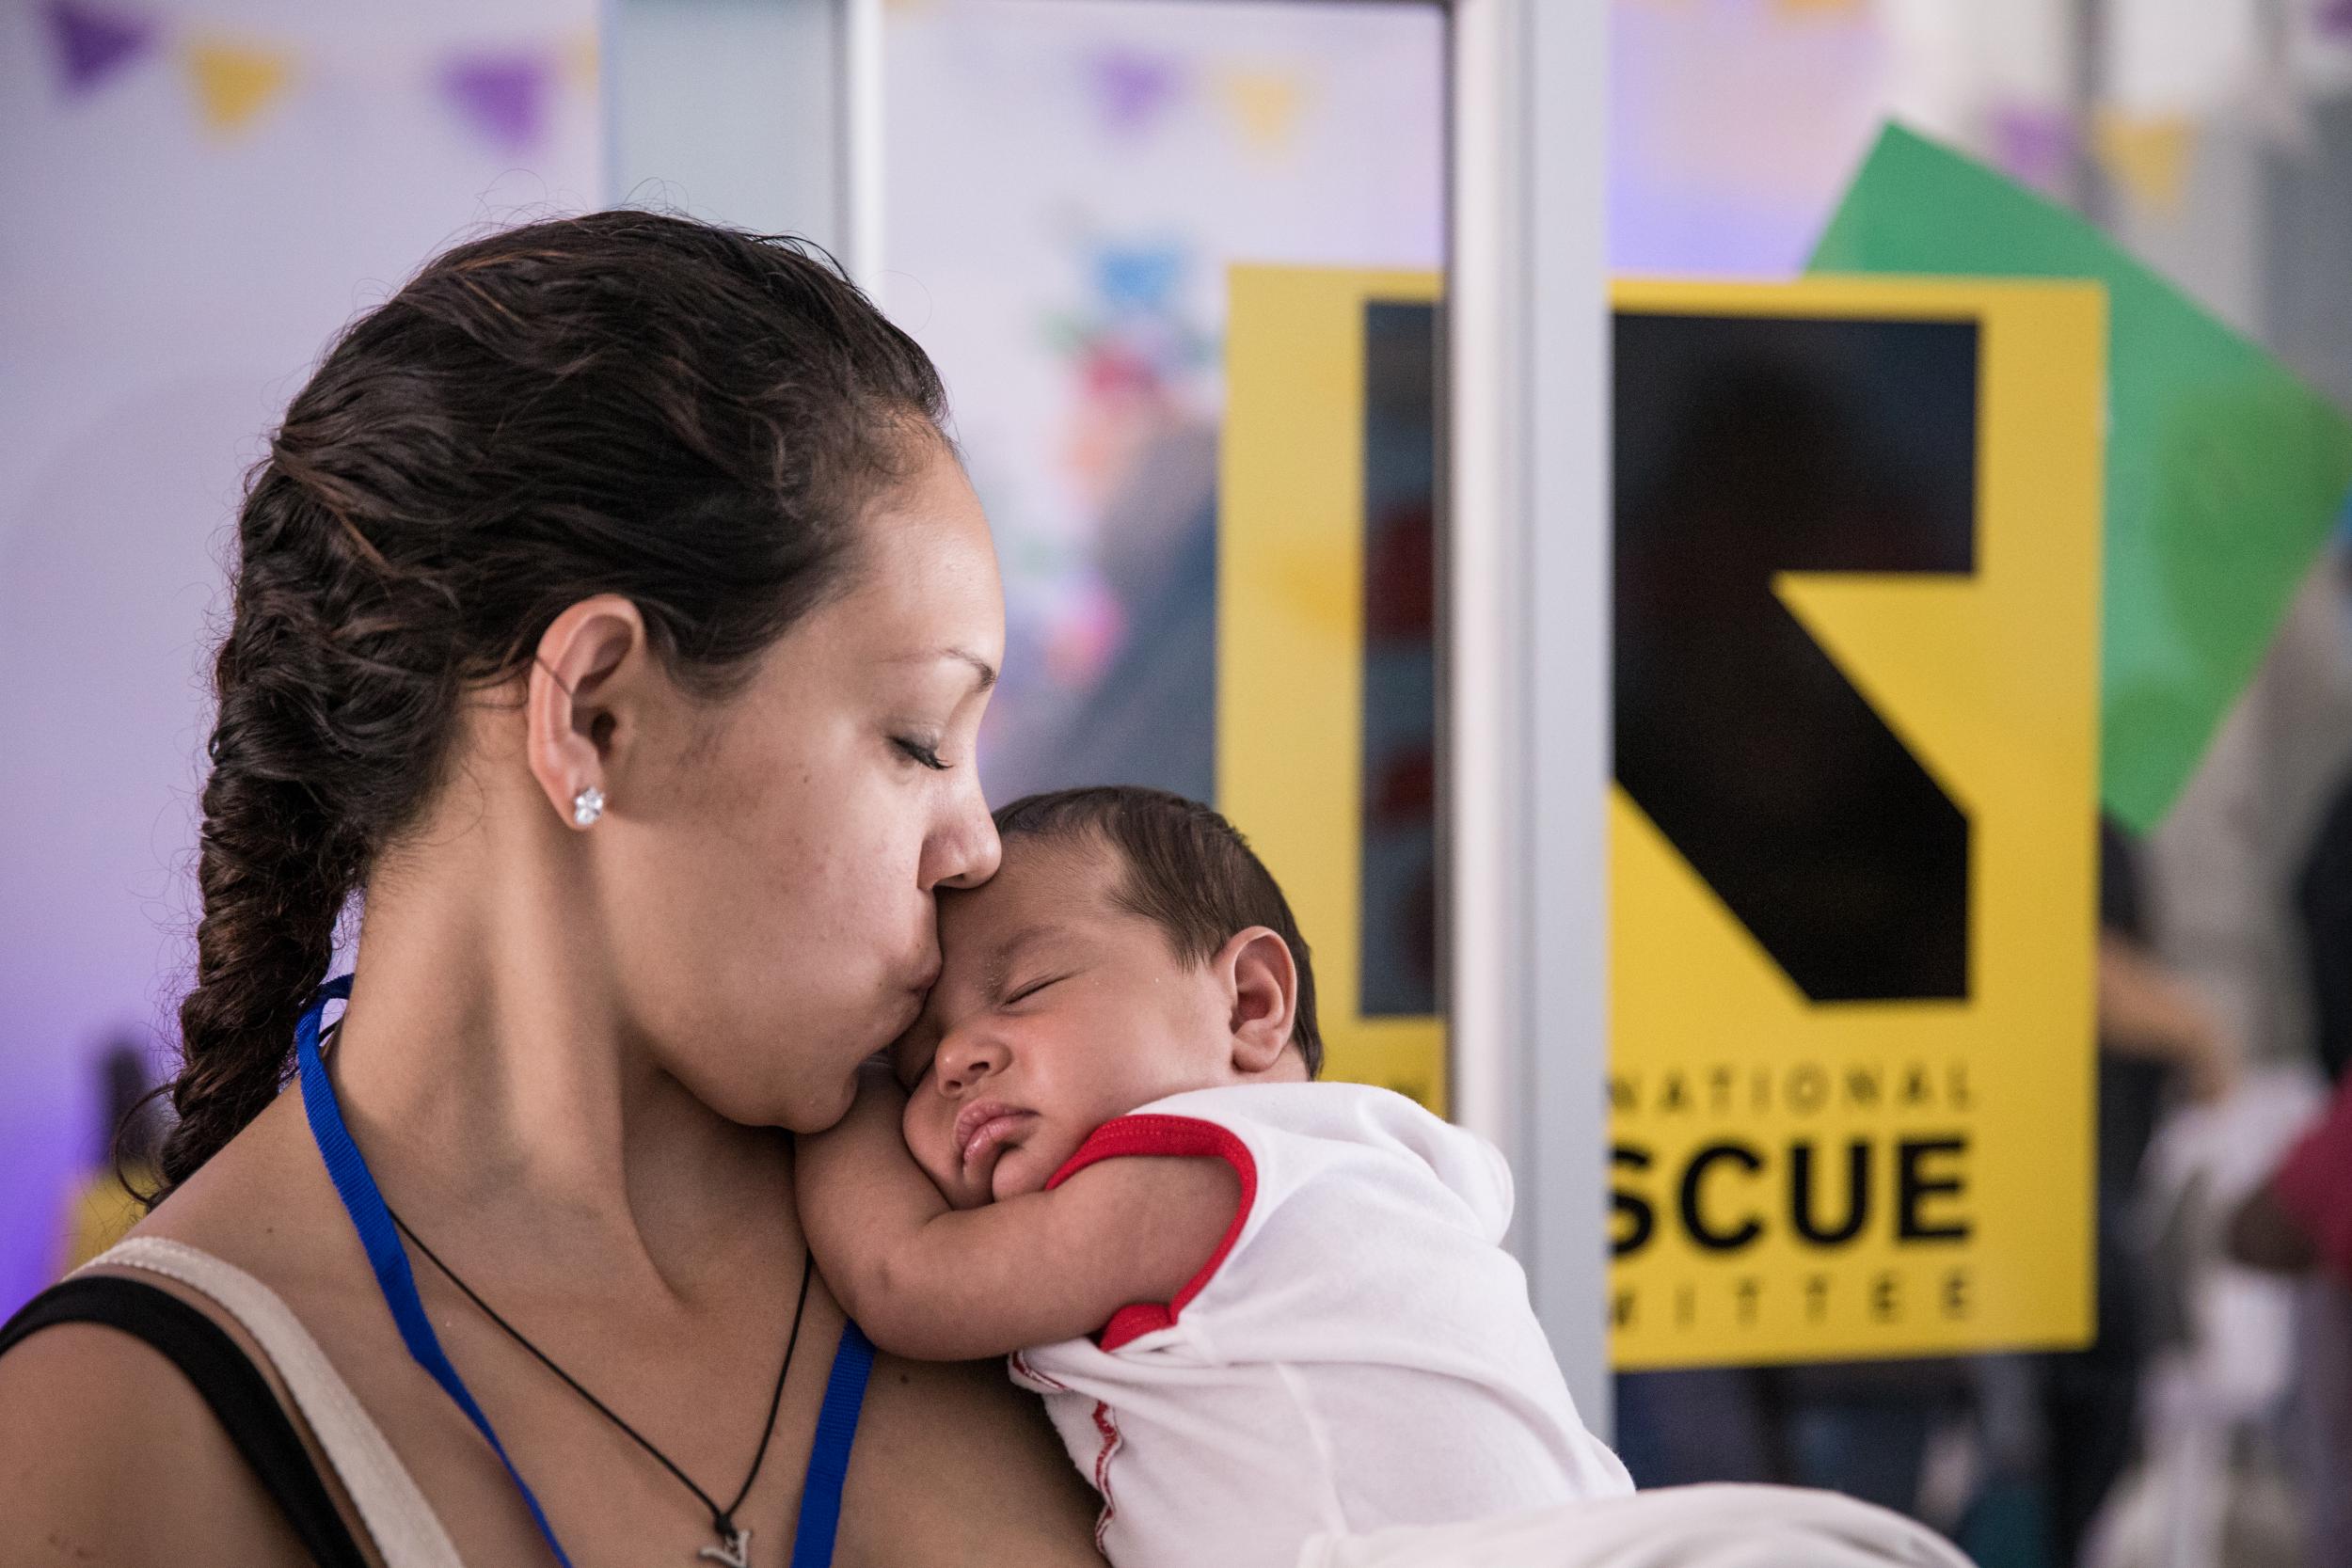 A Venezuelan mother kisses her young child at IRC’s centre in Cucuta, Colombia, where she is receiving support